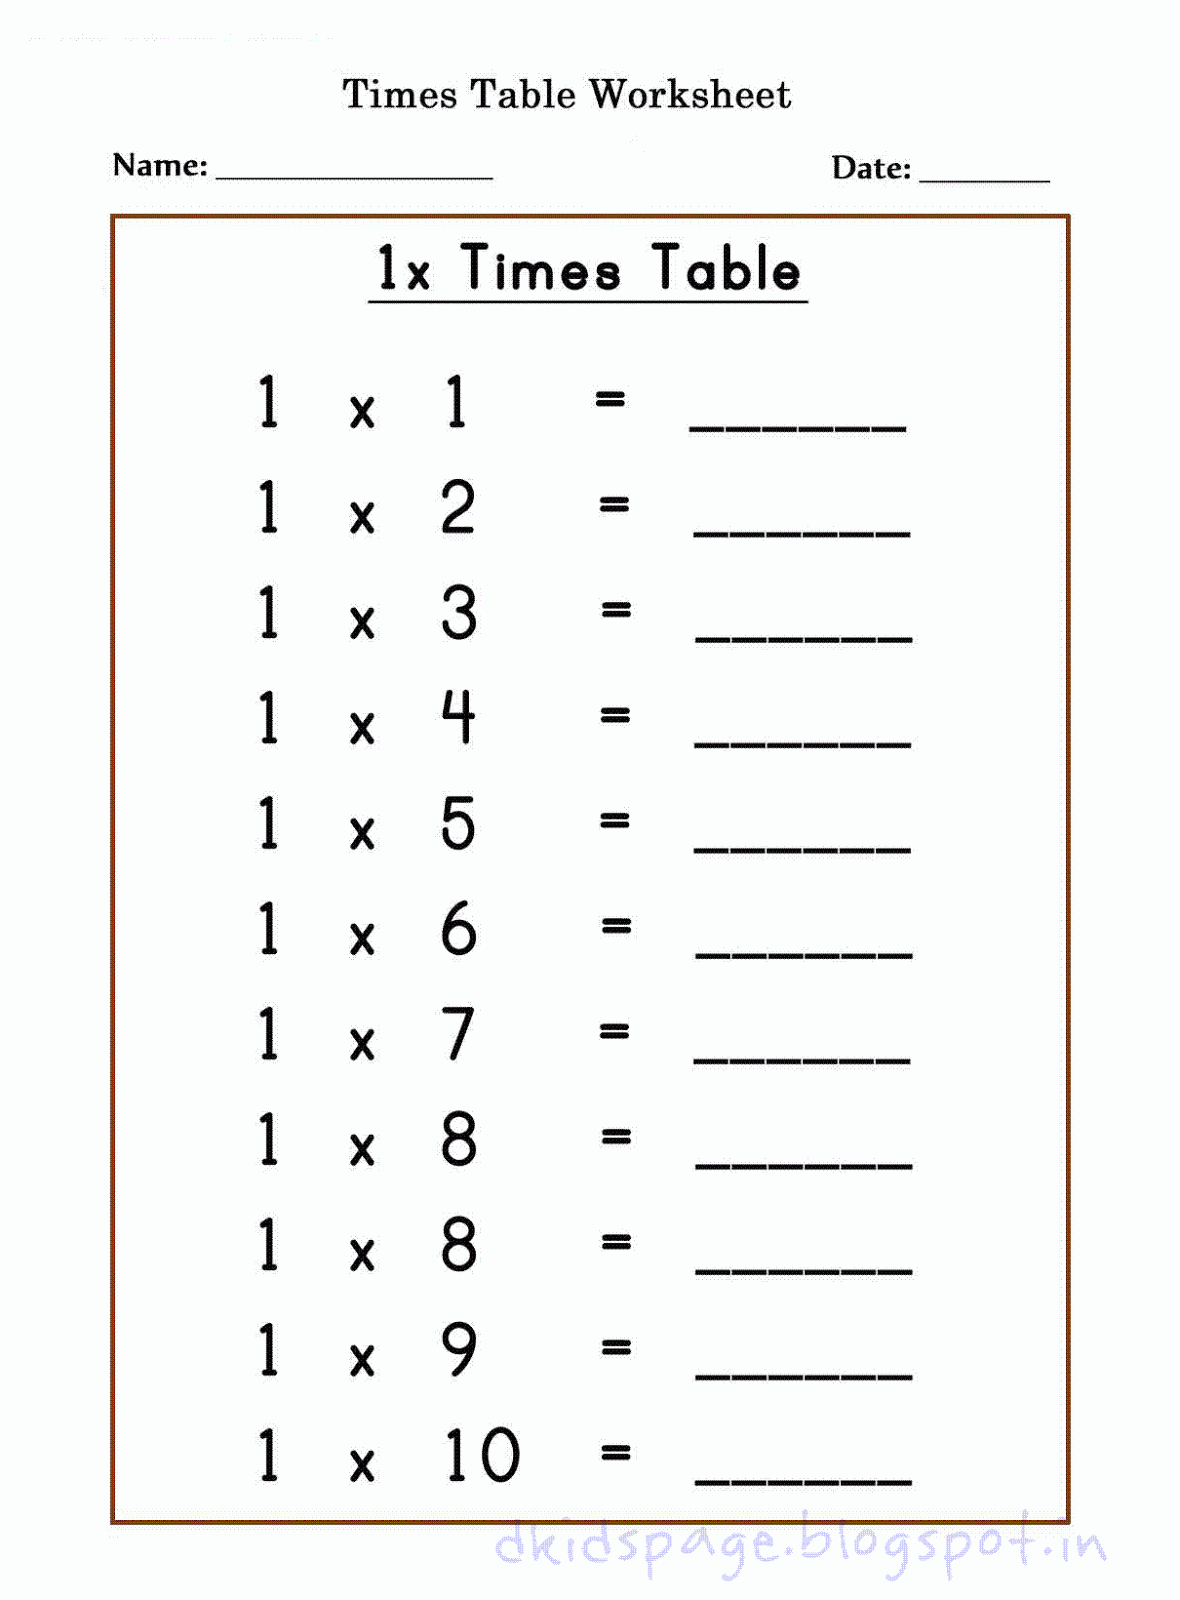 Kids Page: Printable 25 X Times Table Worksheets for Free With Regard To 2 Times Table Worksheet